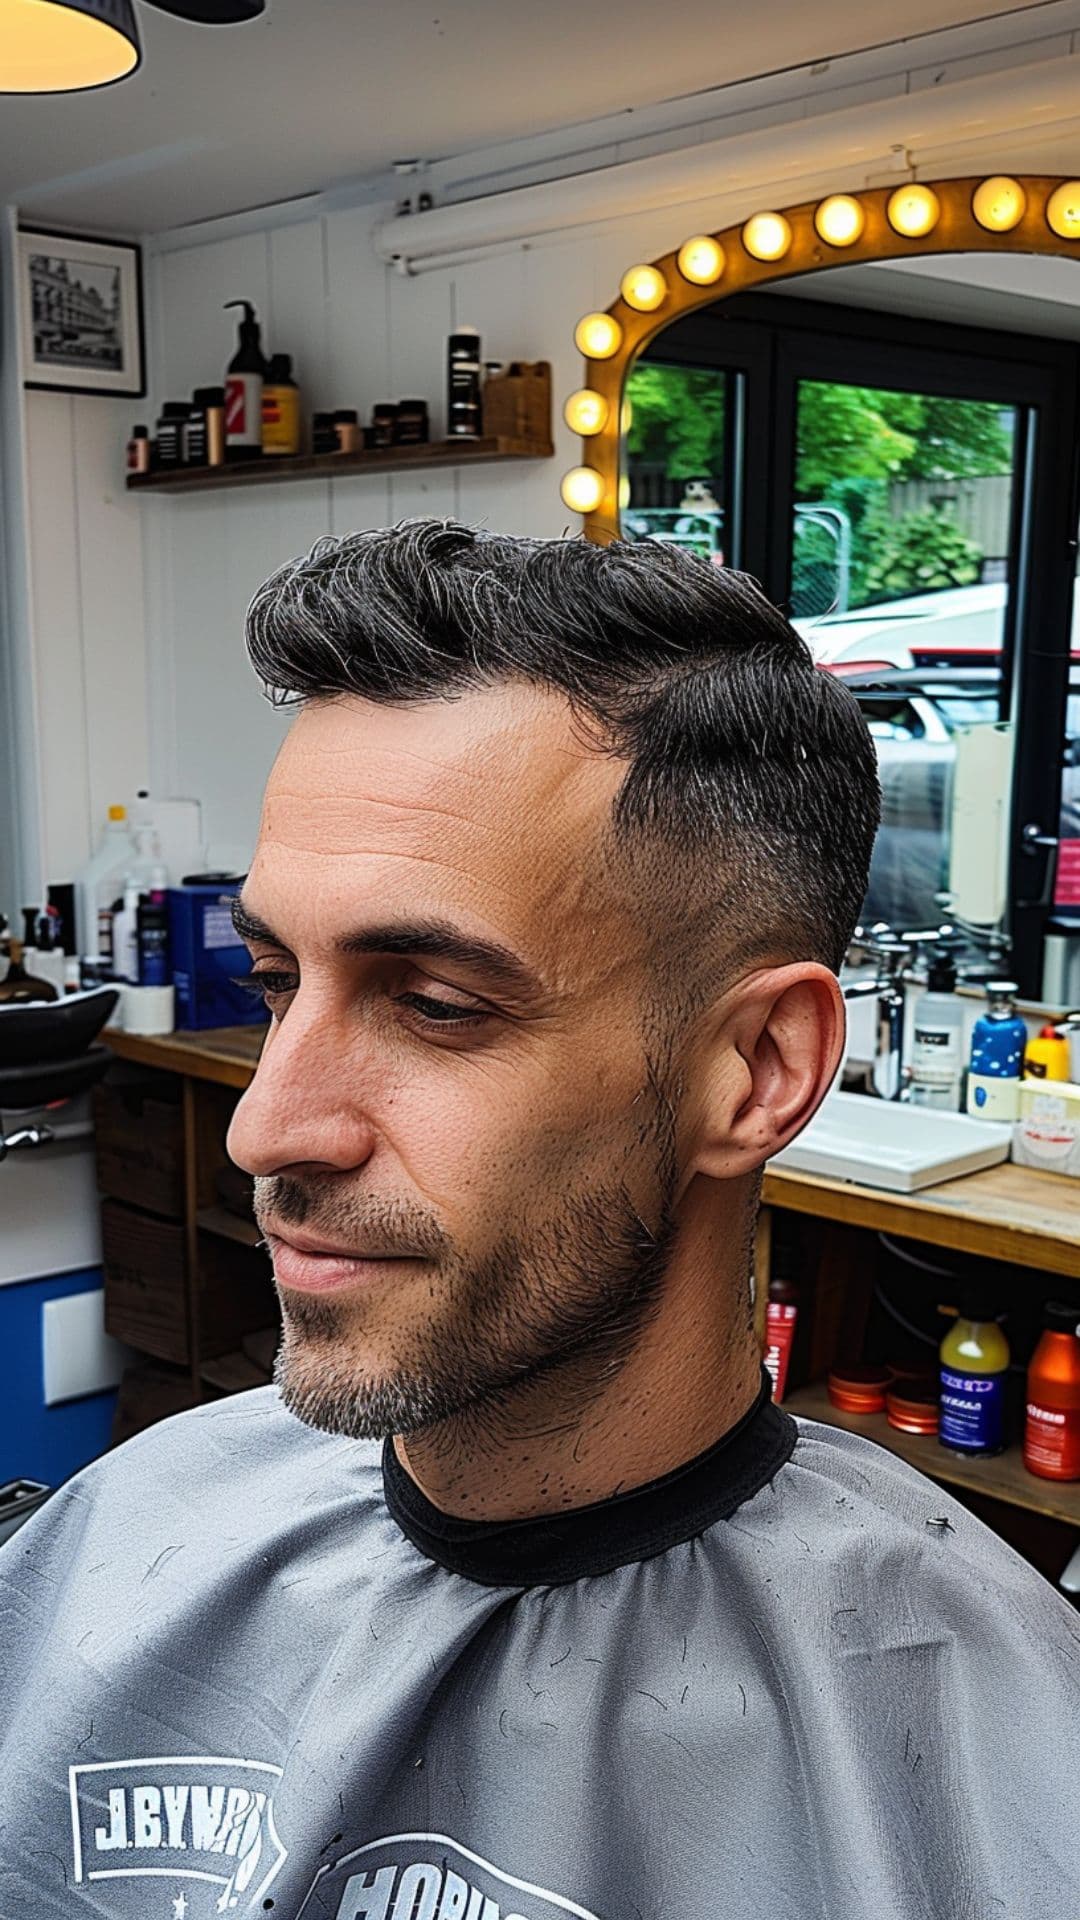 A middle aged man modelling a side part haircut.